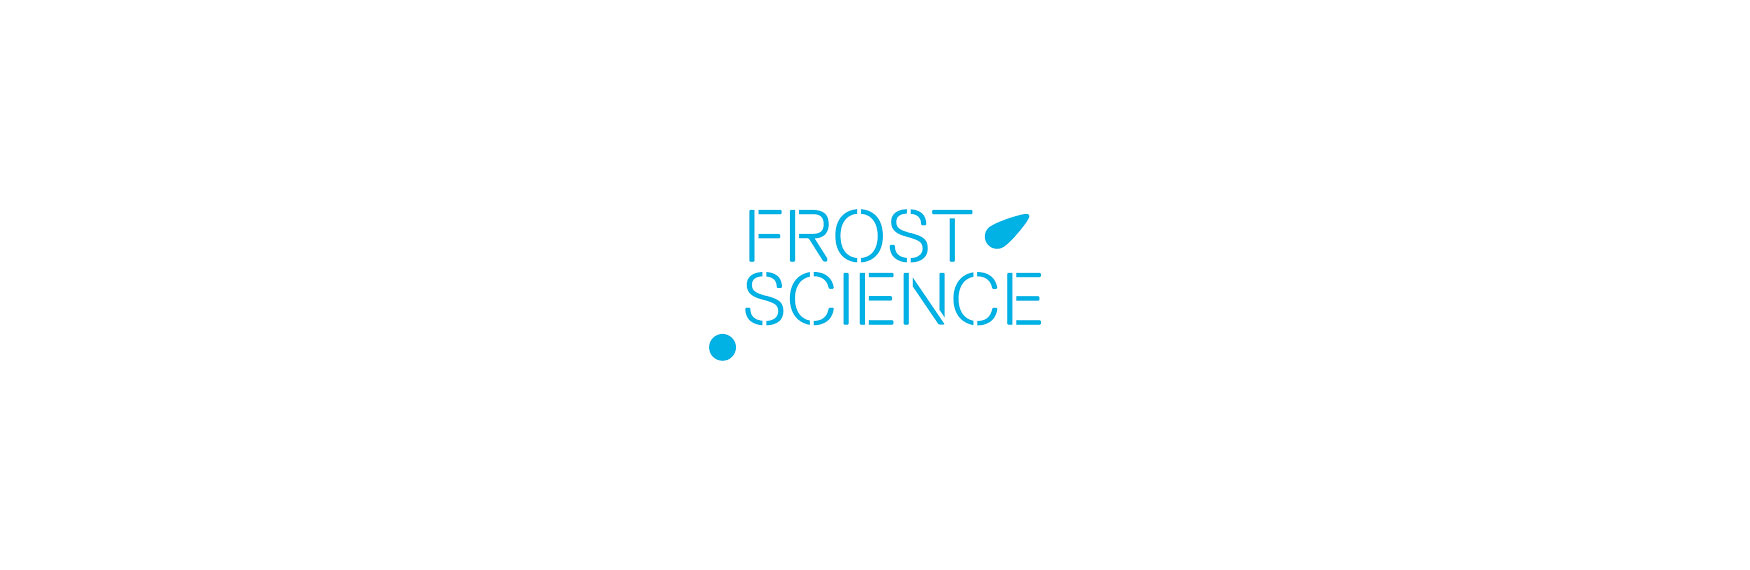 Frost Science 